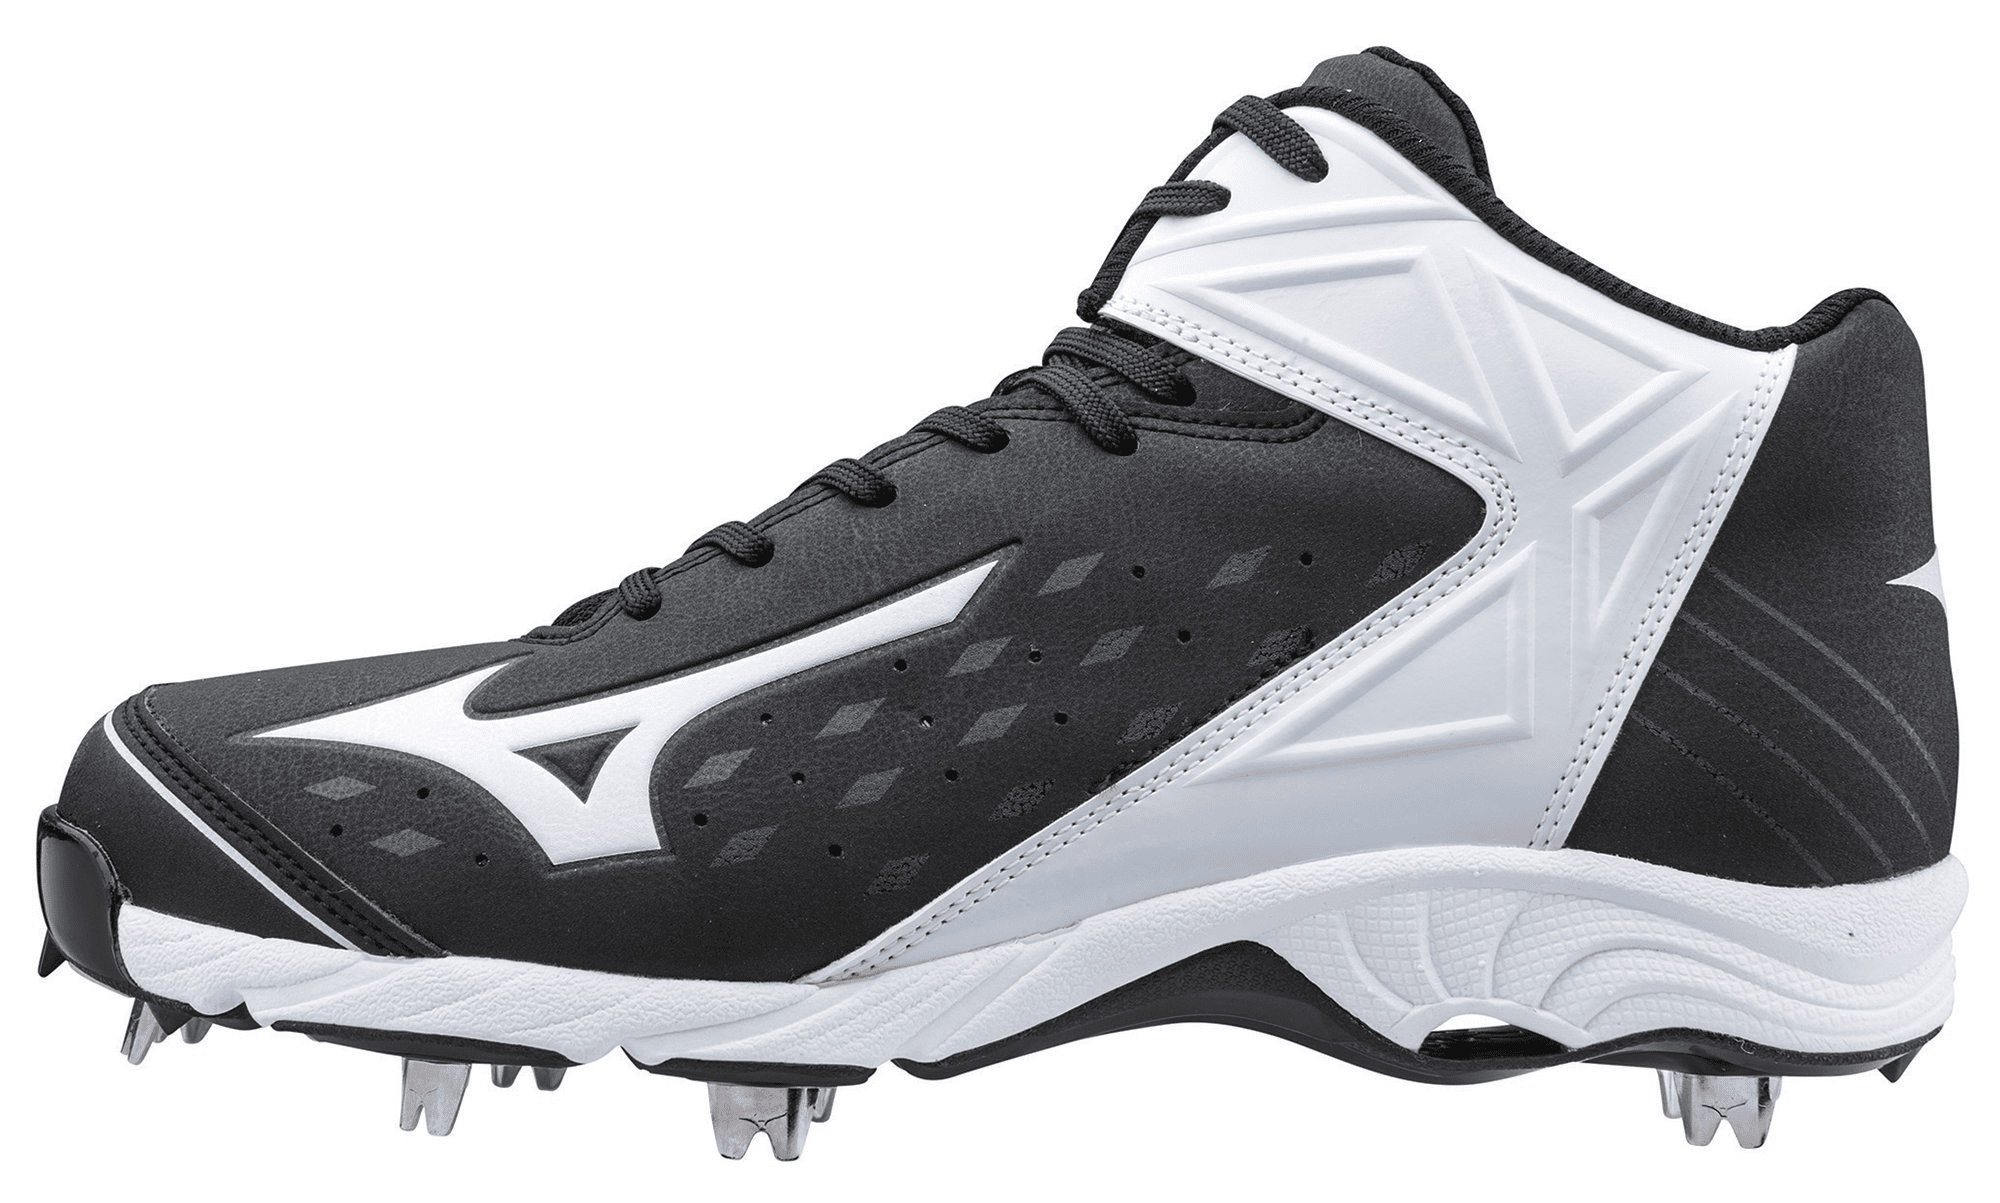 Mizuno Homme Taille 12.5 9-Spike ADV Swagger 2 Bas Base-ball Crampons Métal Mult Sz 